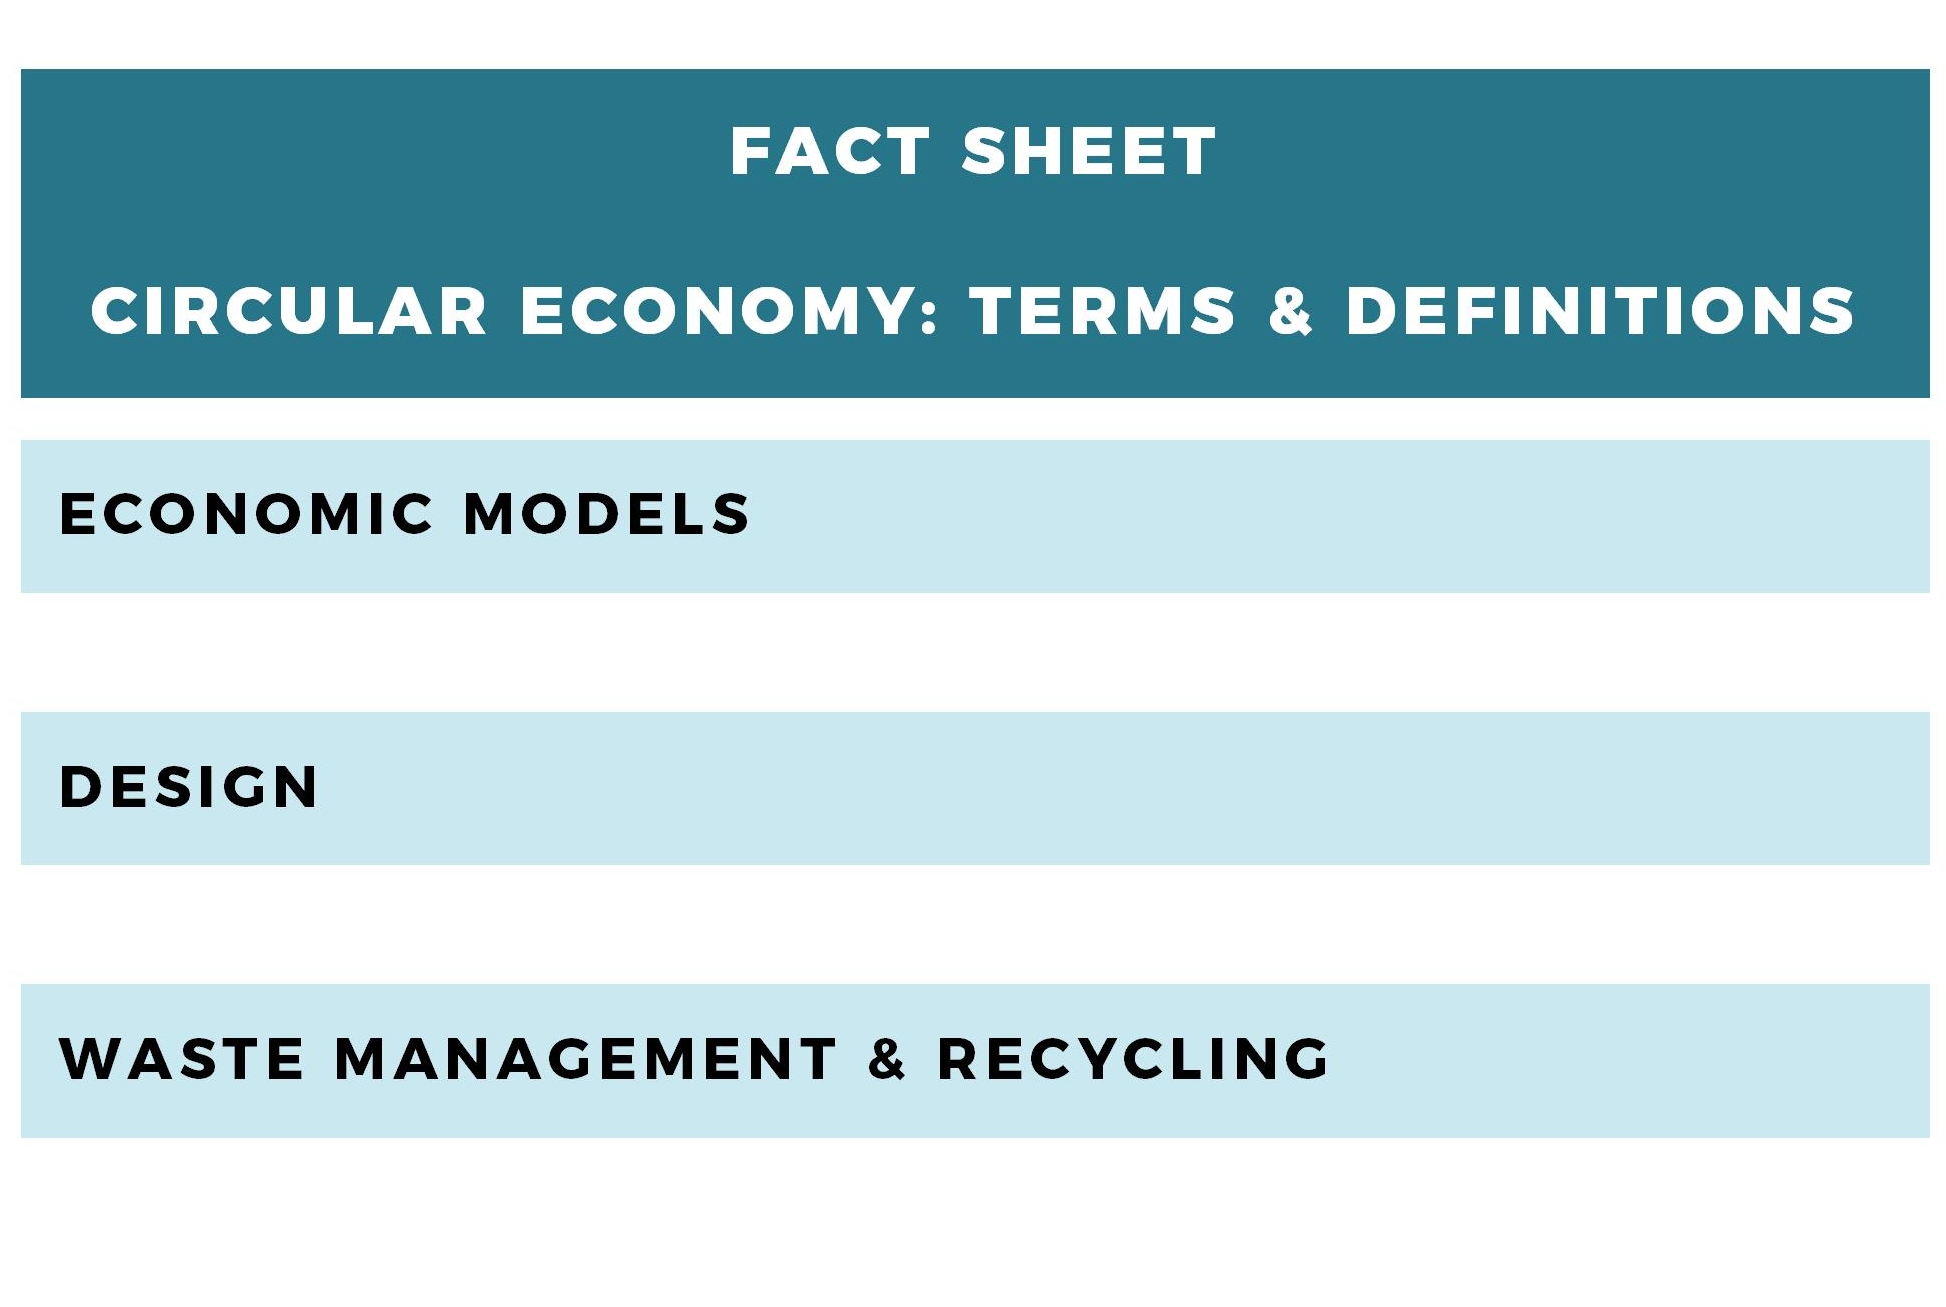 Fact Sheet "Circular Economy: Terms and Definitions"